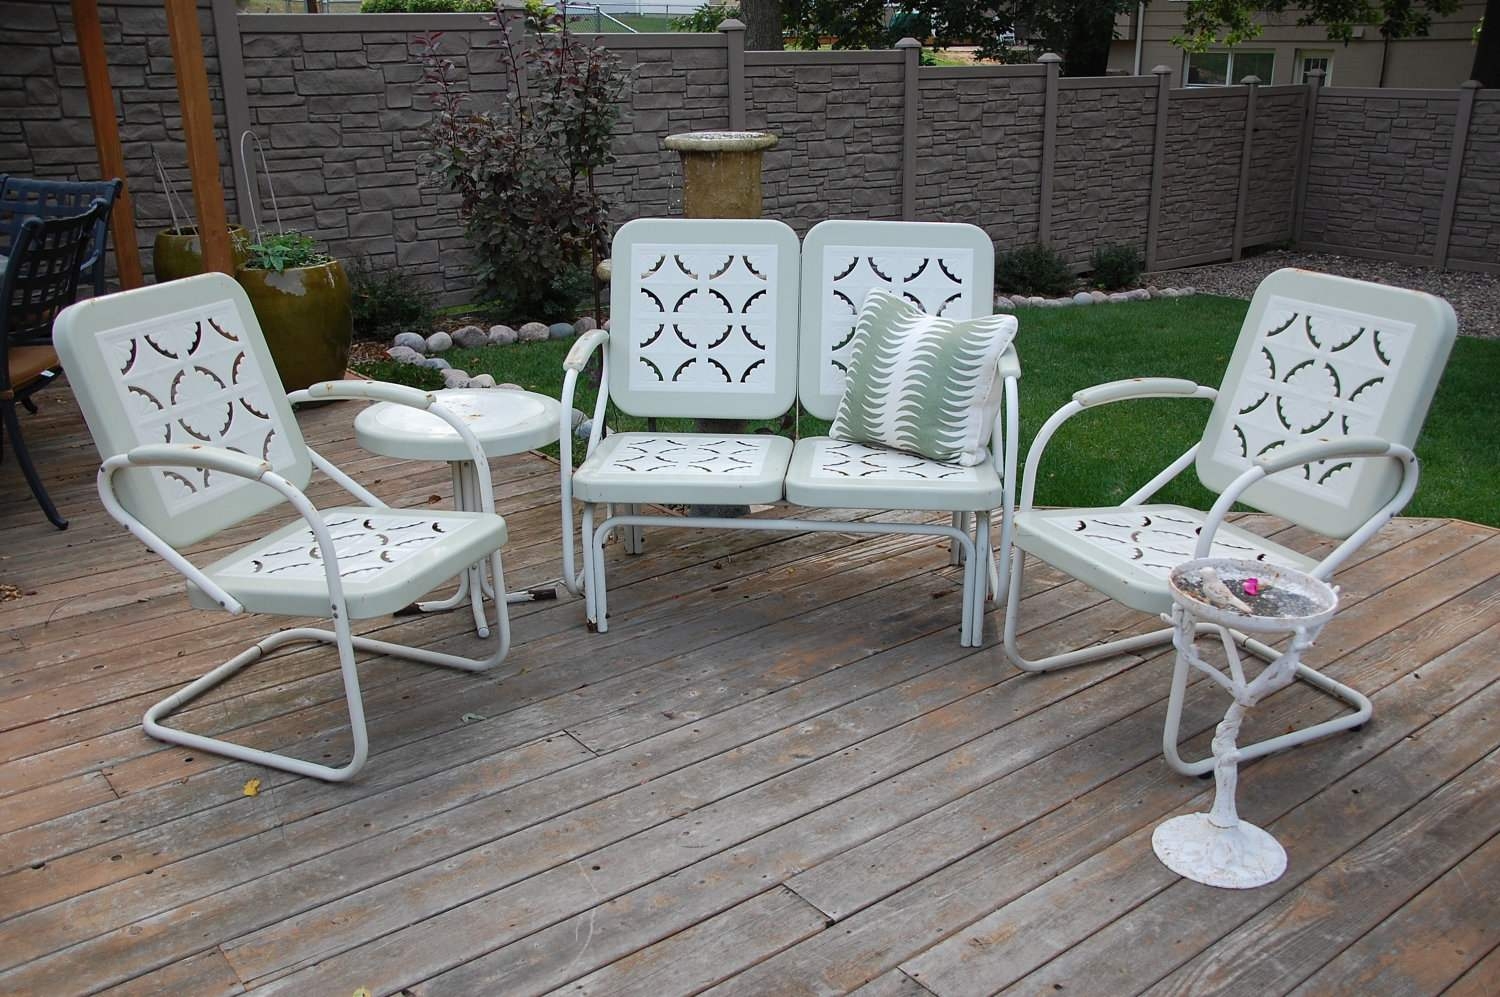 Vintage Metal Lawn Chairs Visualhunt, White Metal Retro Outdoor Chairs